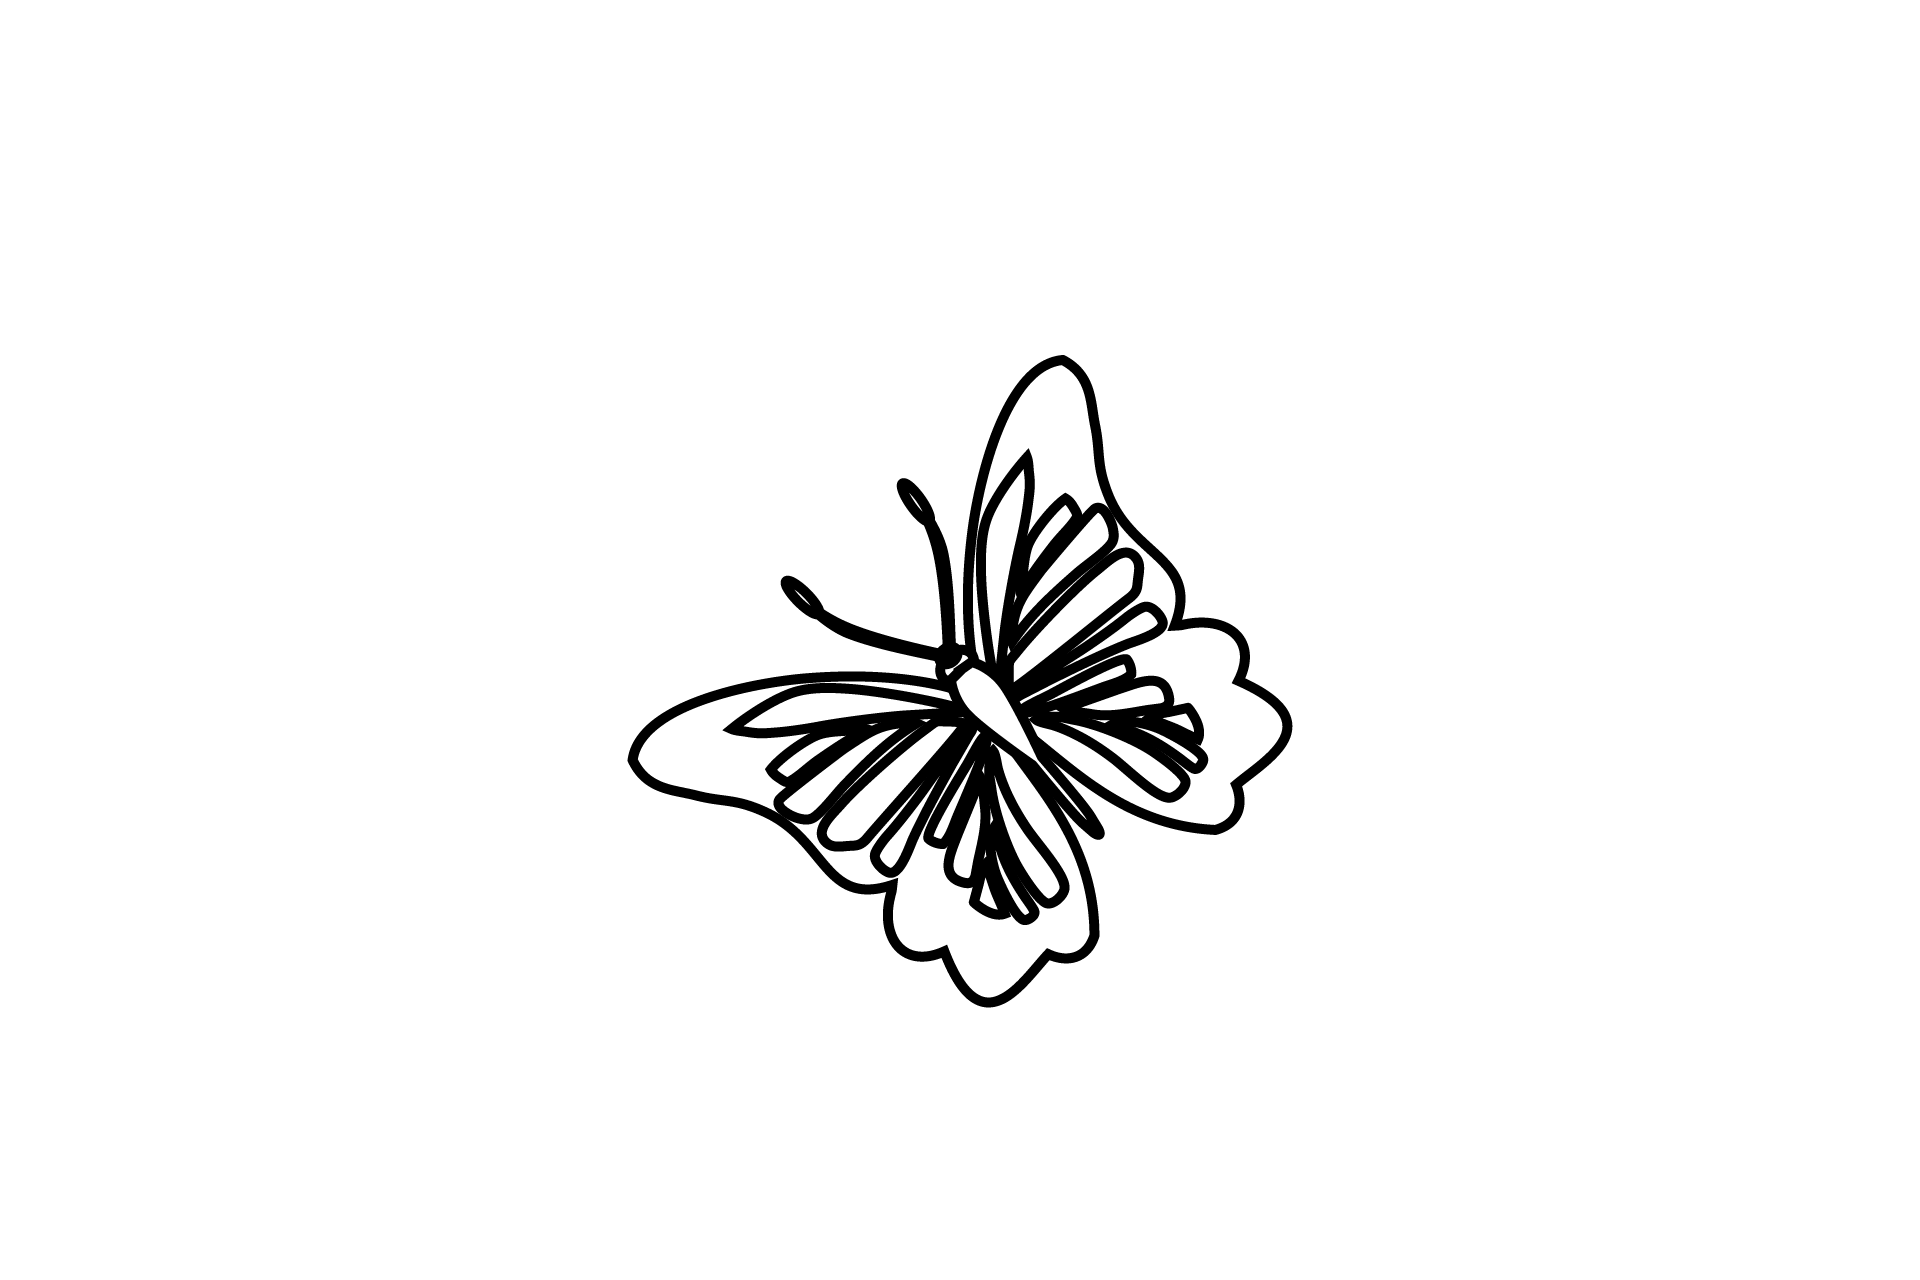 Butterfly Fly Wings Outline Graphic by lionalstudio · Creative Fabrica